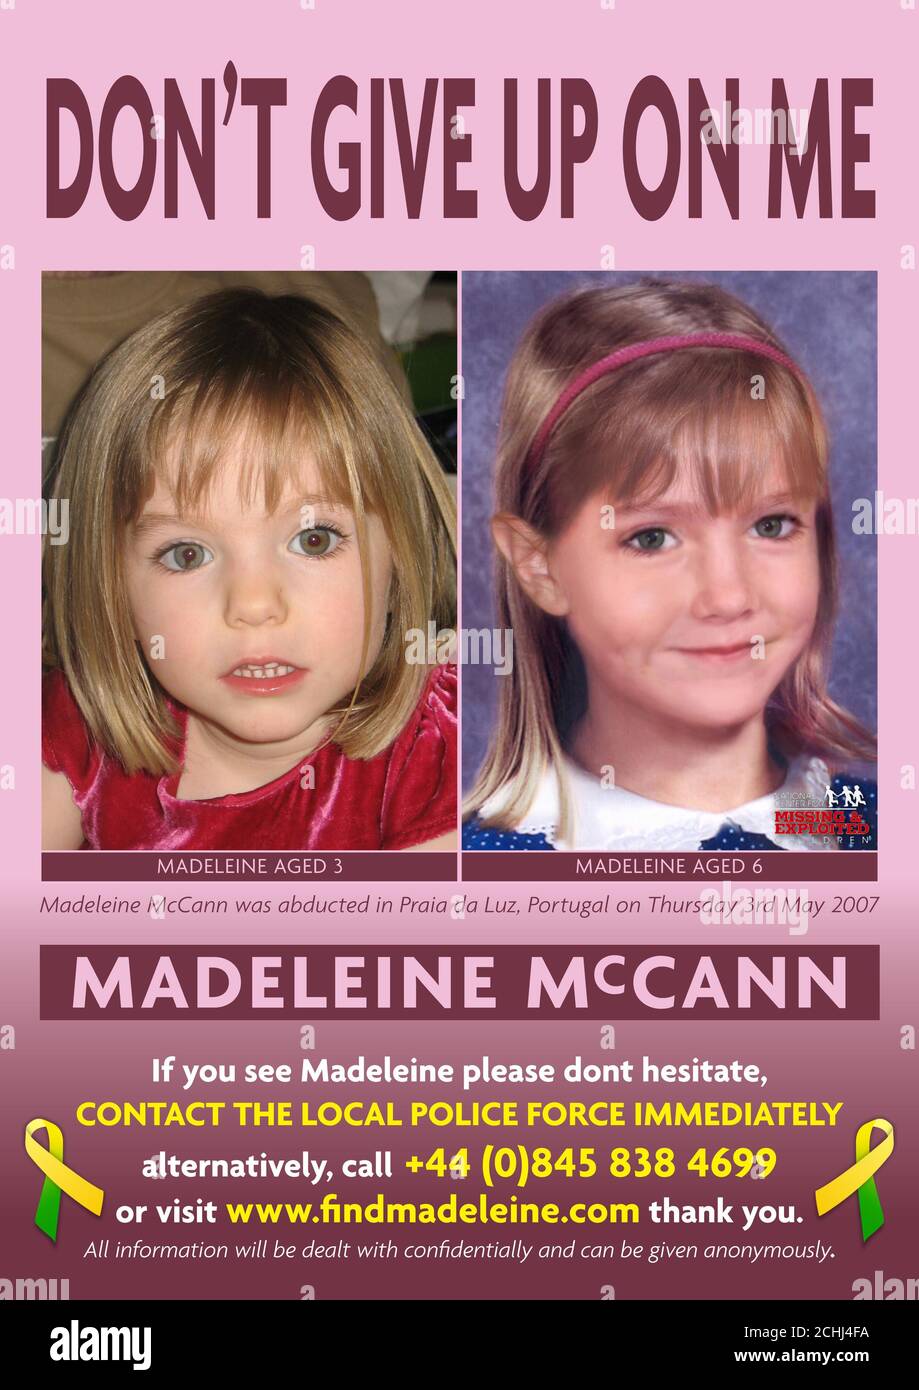 This is one of two new posters being released by the Find Madeleine Campaign which show Madeleine McCann as she was aged three, and how she might look now, aged six. Madeleine was abducted in Praia da Luz, Portugal, on May 3, 2007. Stock Photo